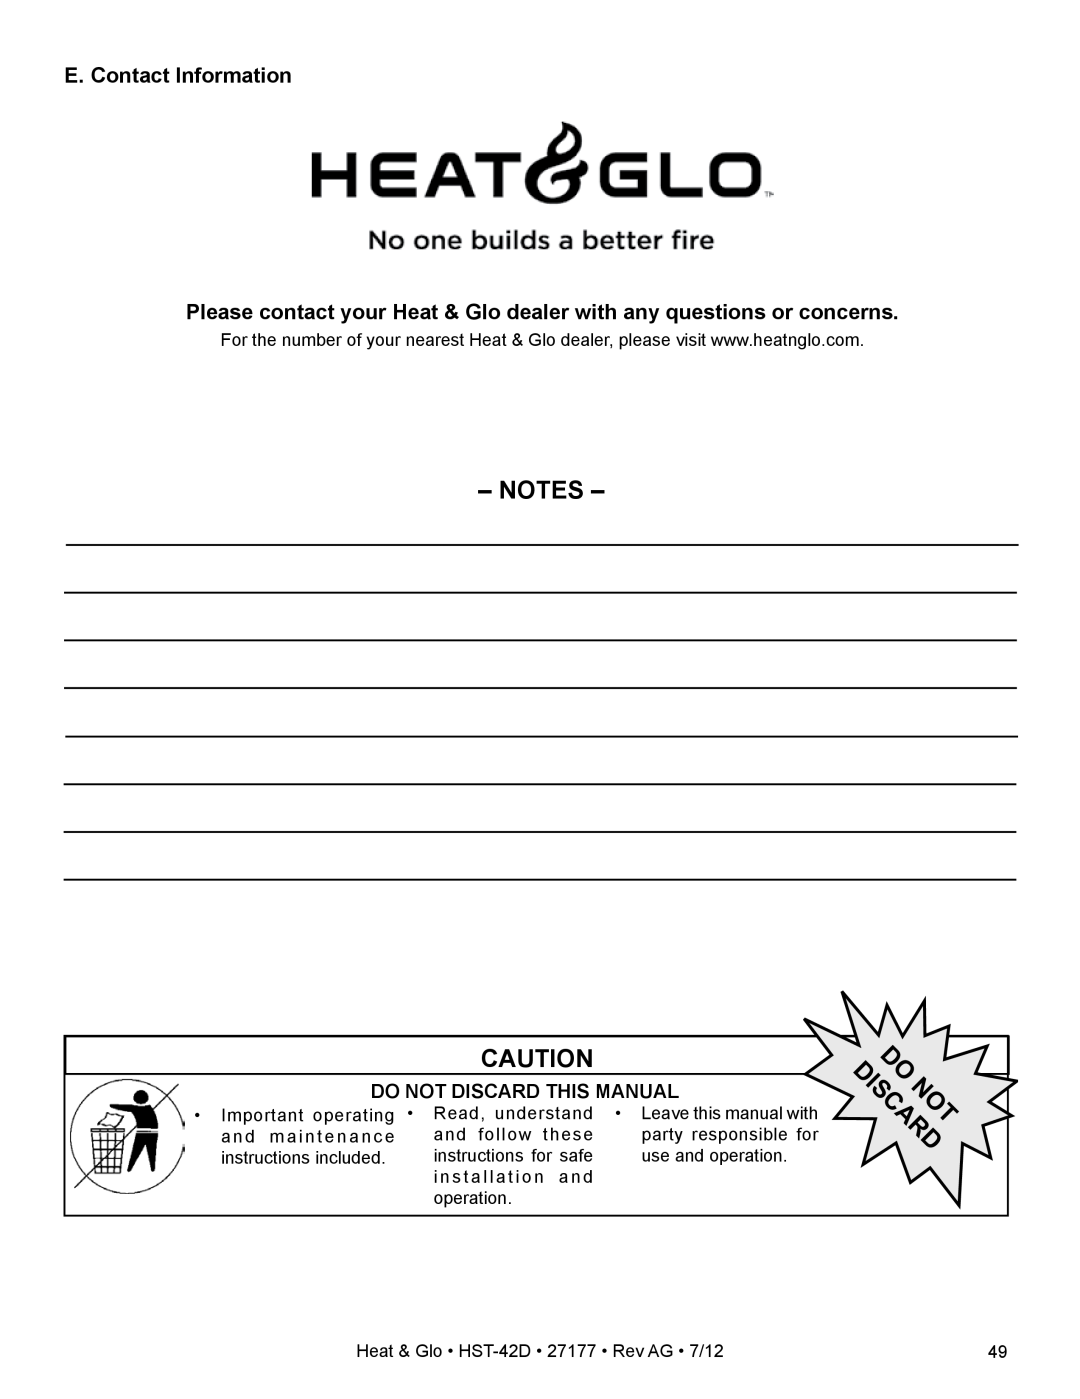 Heat & Glo LifeStyle HST-42D owner manual E. Contact Information, Do Not Discard This Manual, Do Discardnot 